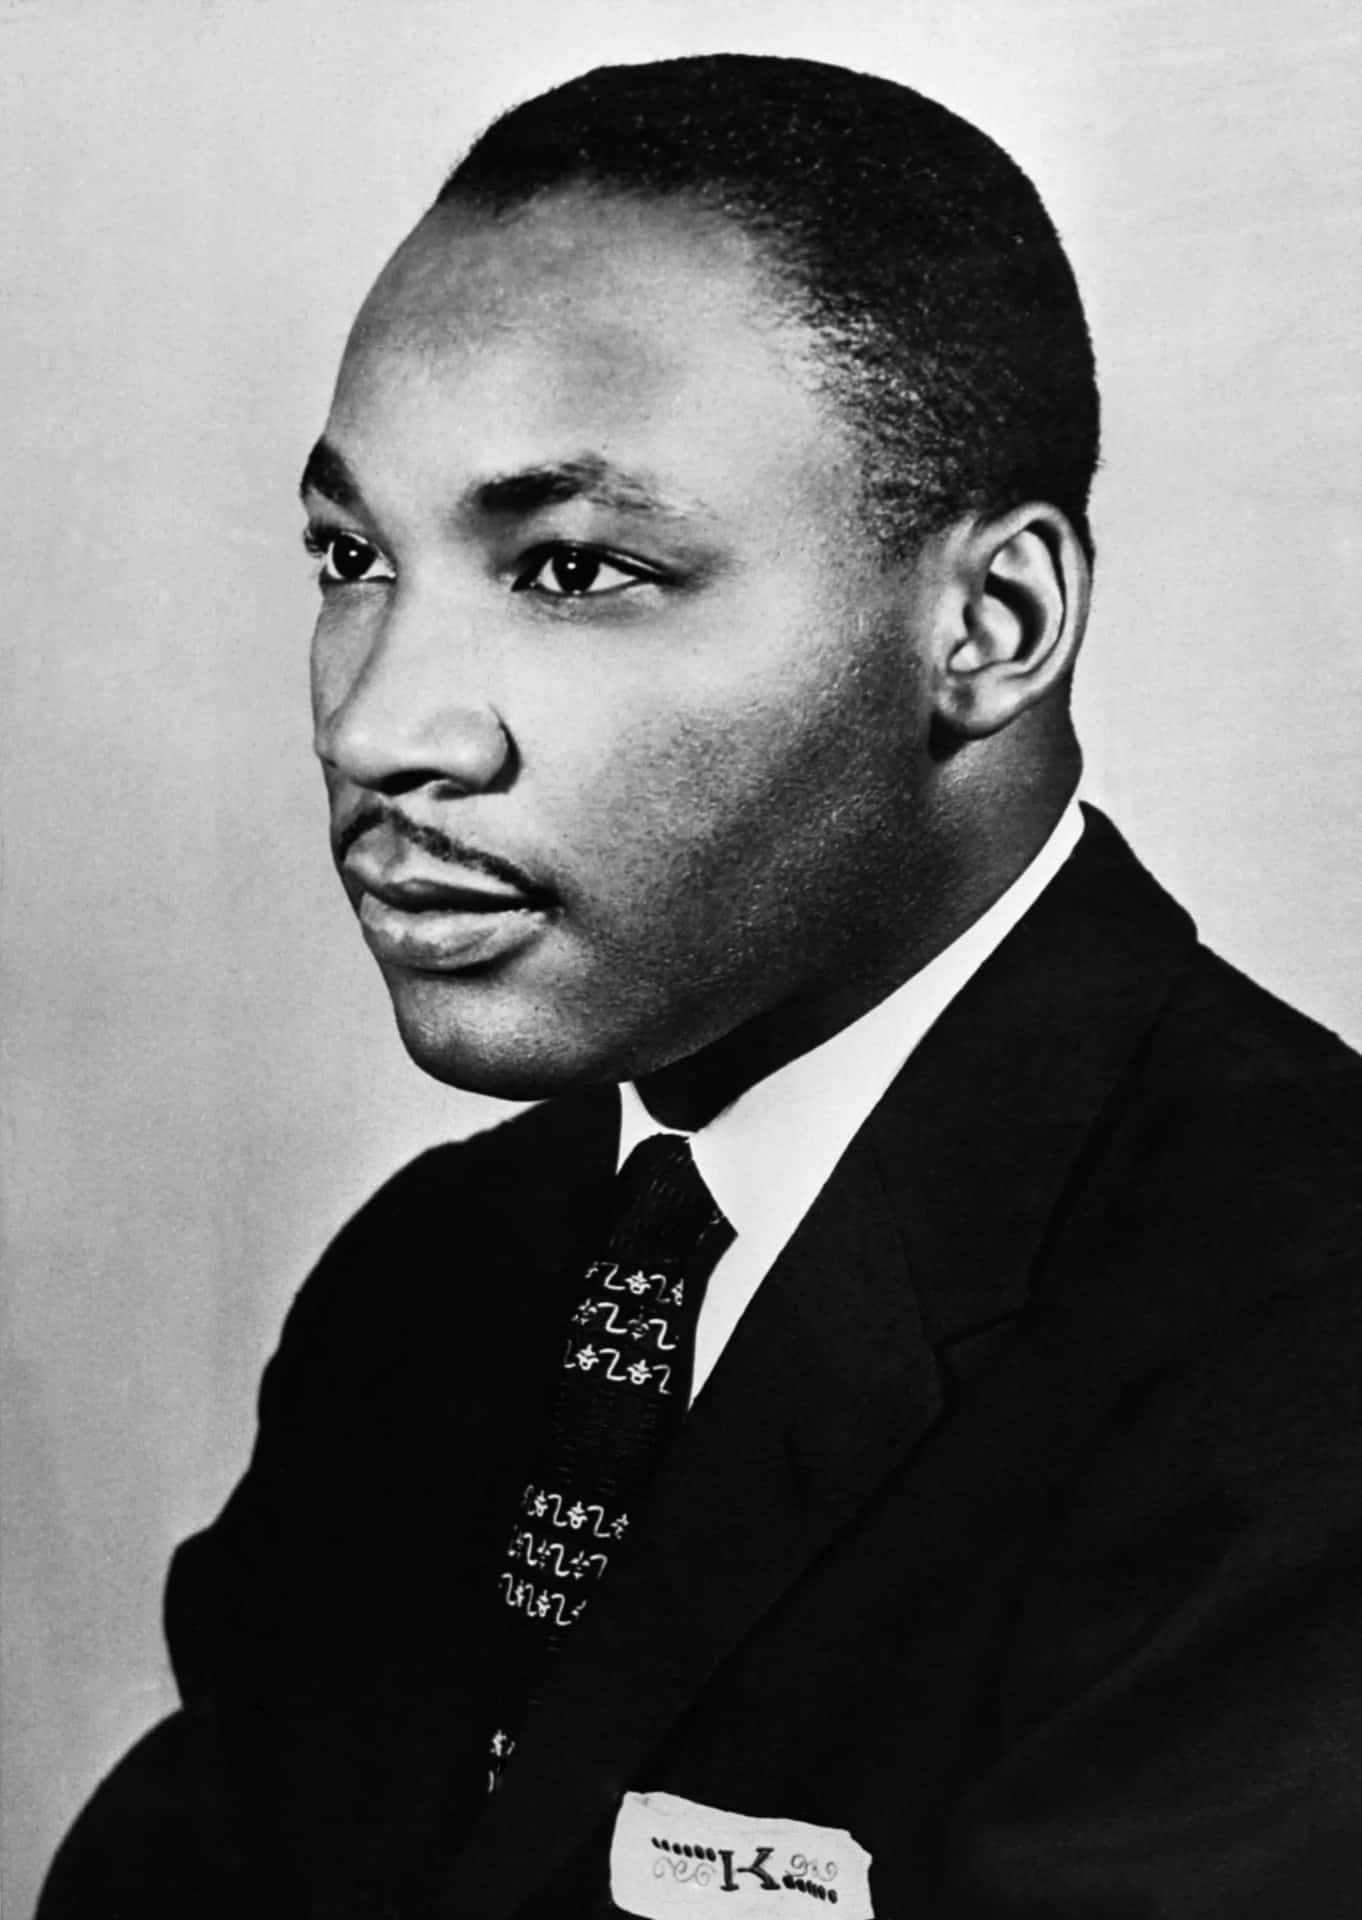 A Black And White Photo Of A Man In A Suit